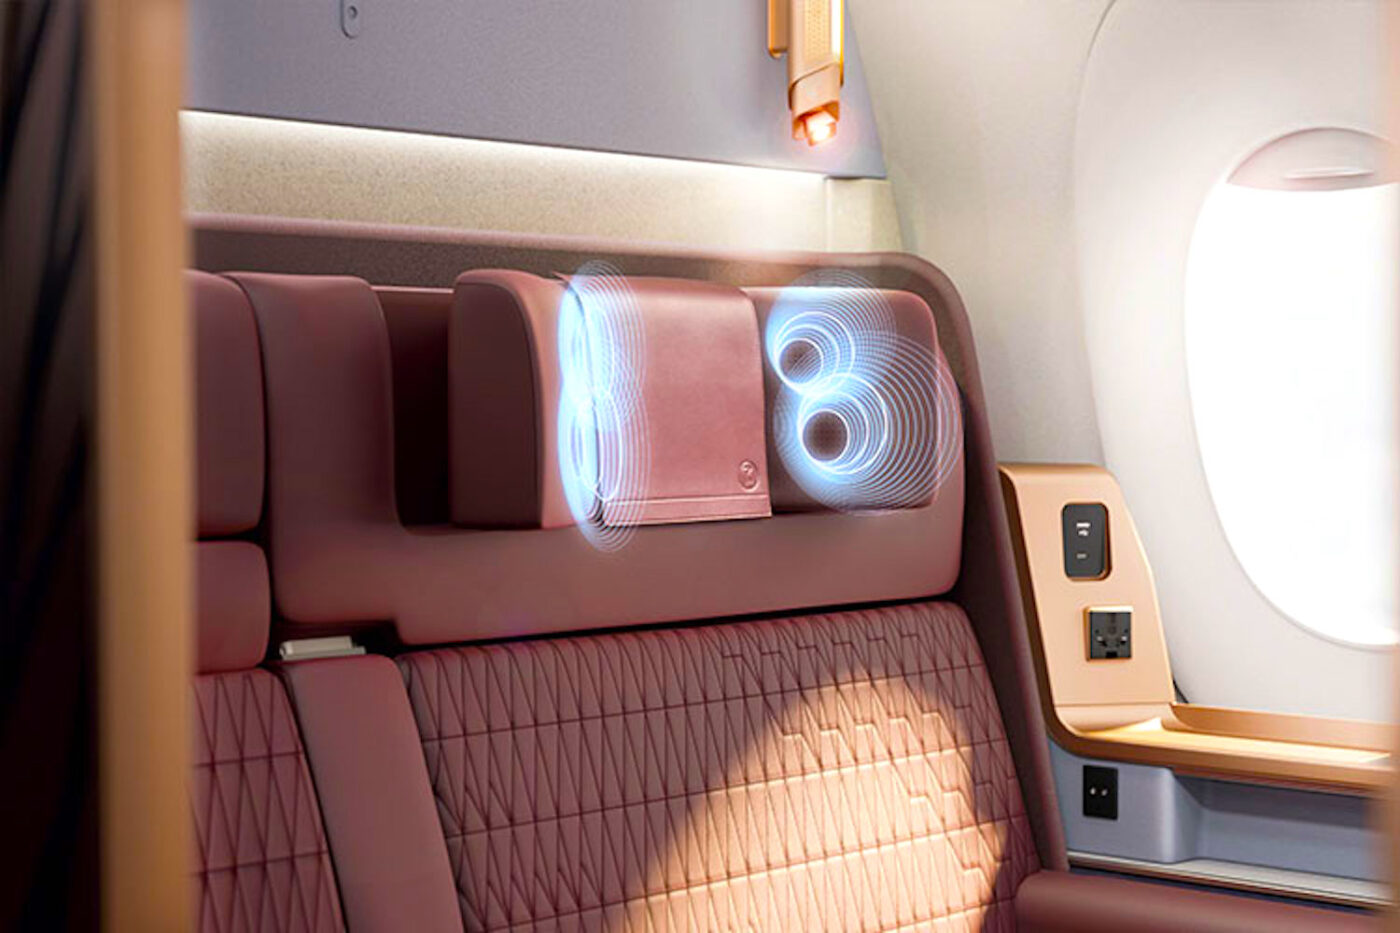 World’s Best First Class And Business Class Cabins Unveiled, Including ‘Headphone-Free’ Technology